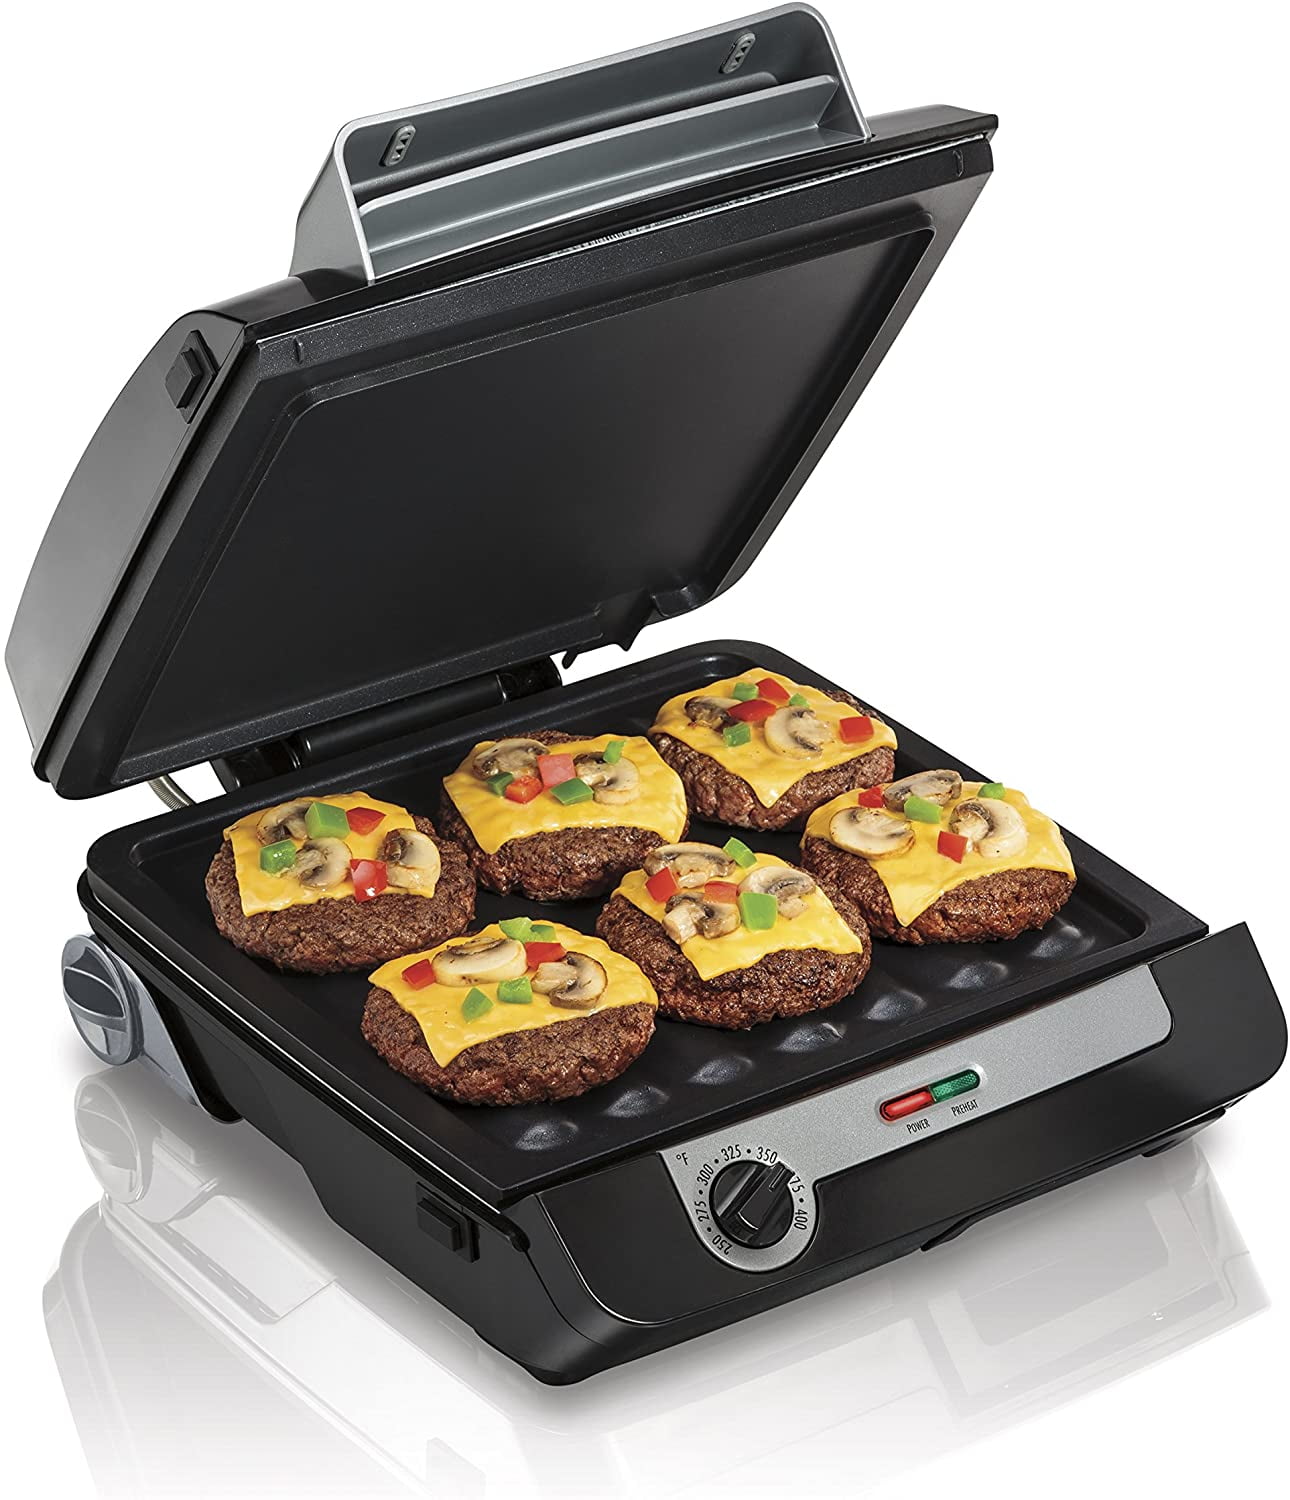 Hamilton Beach 4-in-1 Indoor Grill & Electric Griddle Combo with Bacon  Cooker, Opens Flat to Double Cooking Surface, Removable Nonstick Plates,  Black & Silver (25601) 